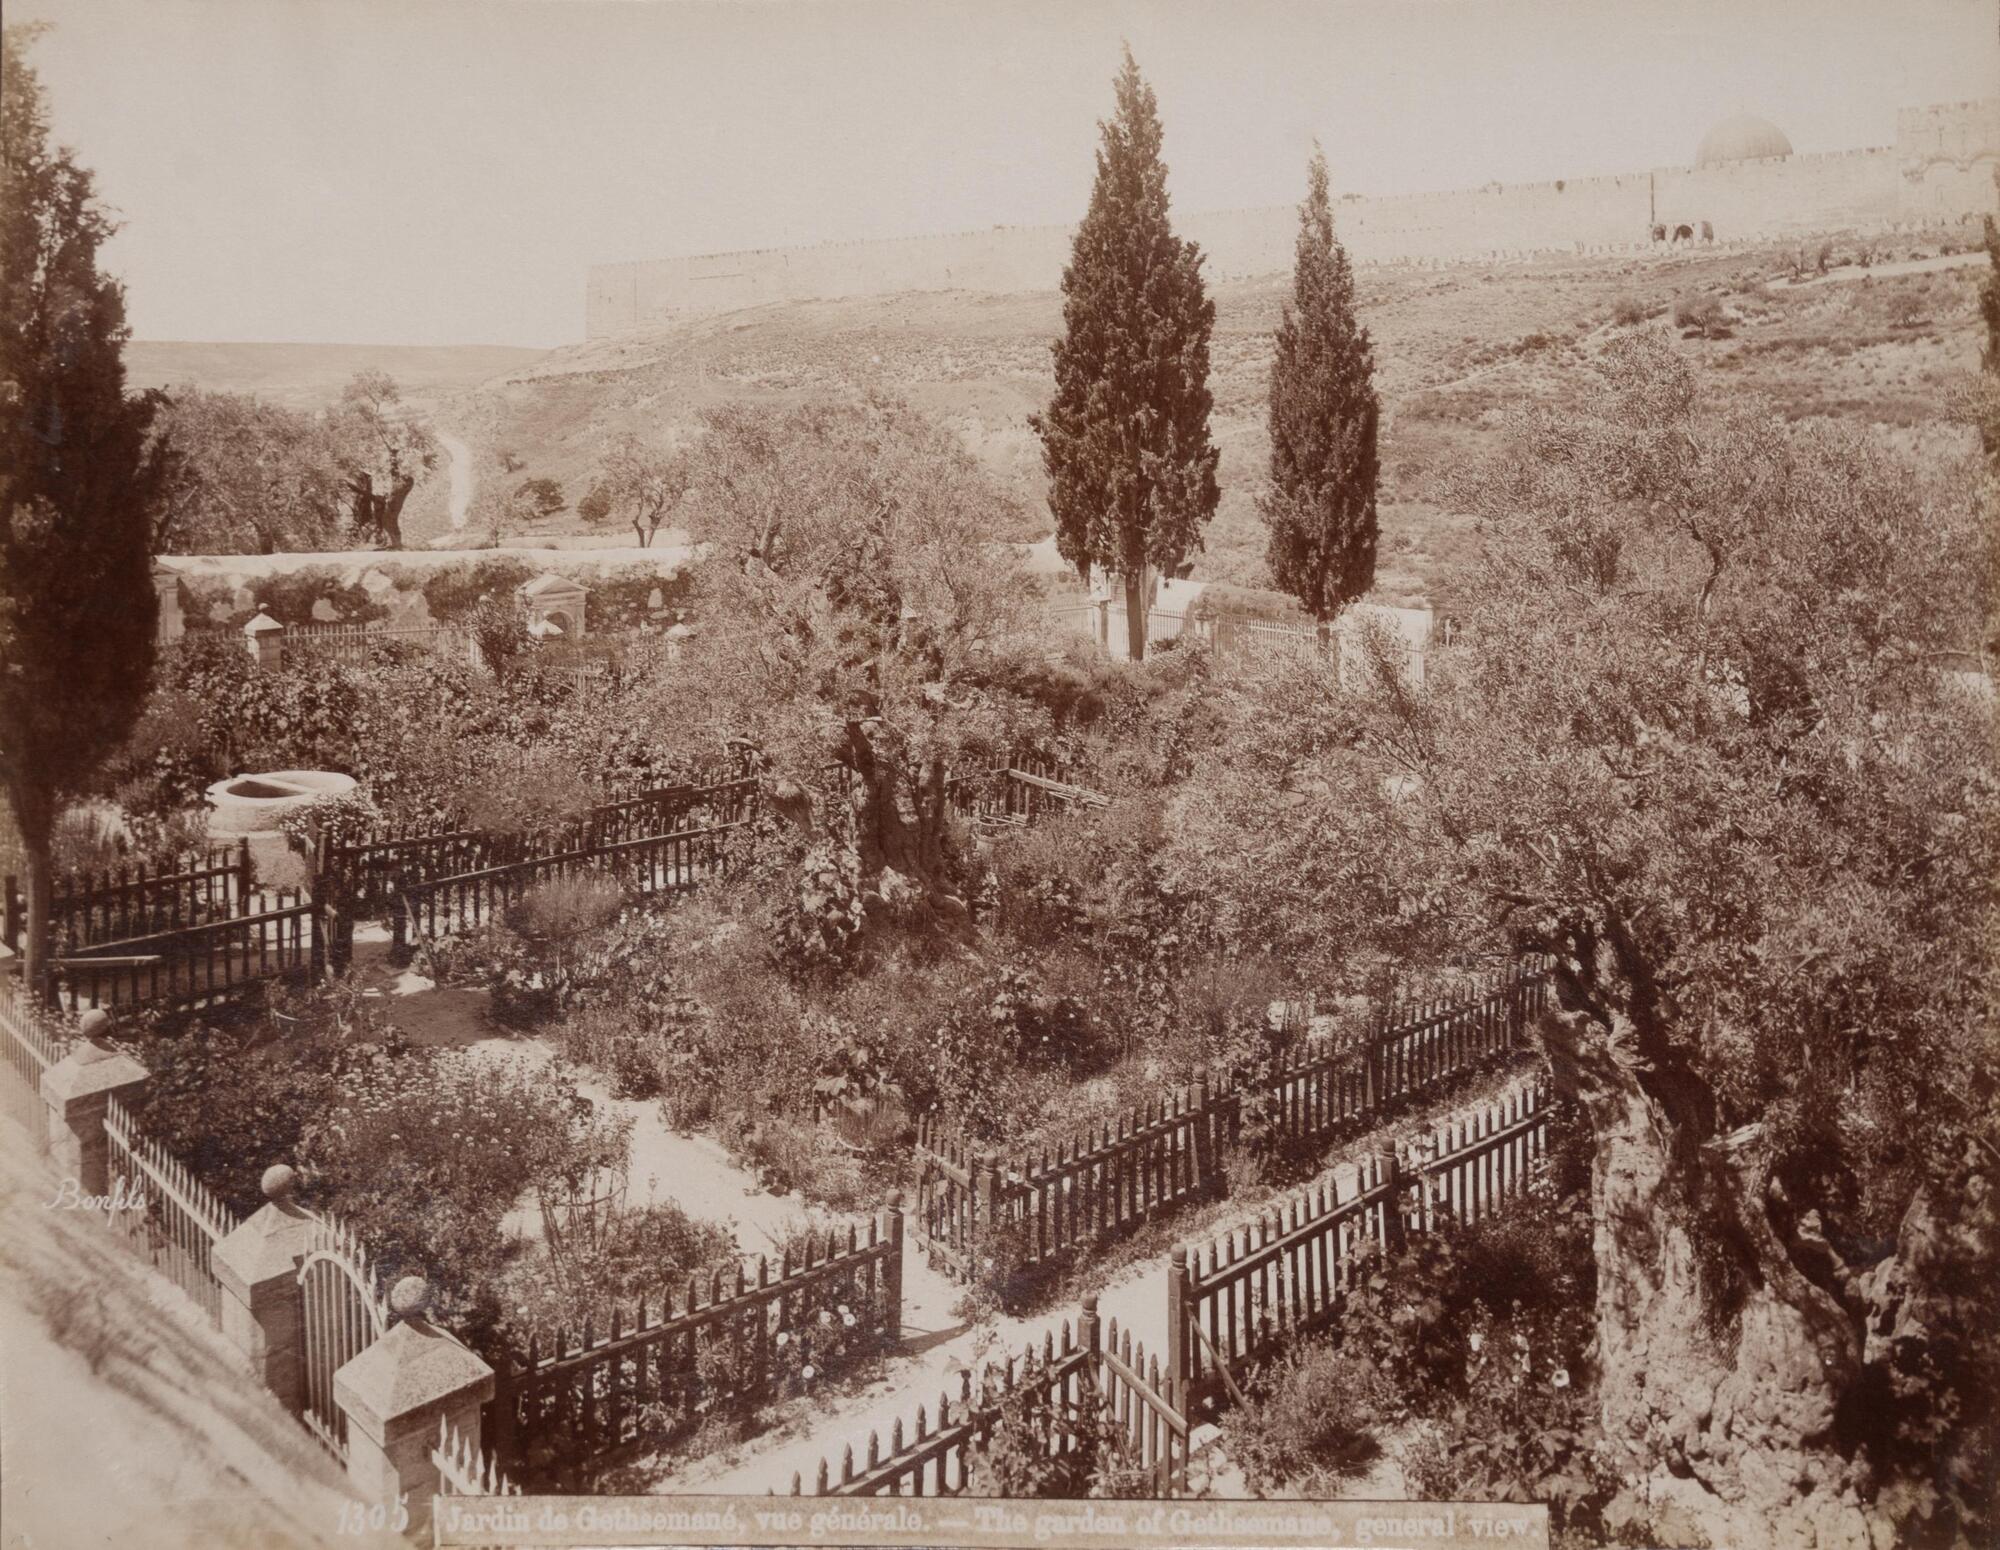 A view down onto a fenced-off garden; a crenellated stone wall and dome are visible in the background. 